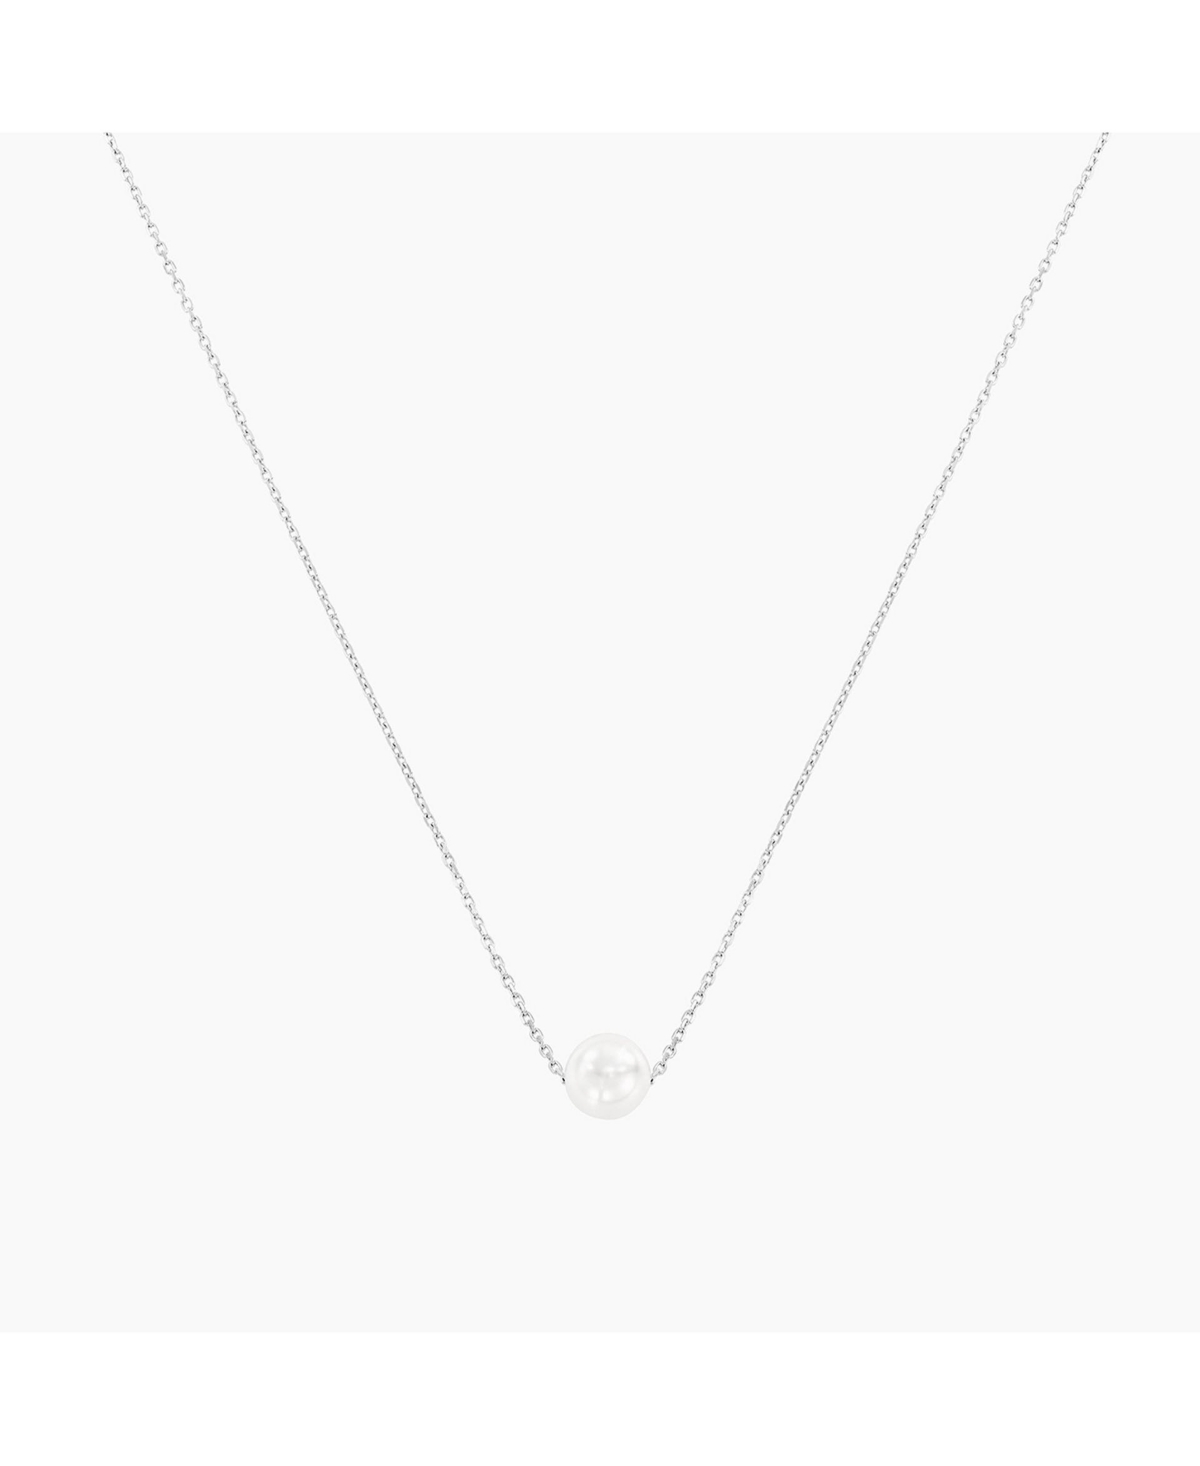 Abby Single Cultured Pearl Necklace - White gold